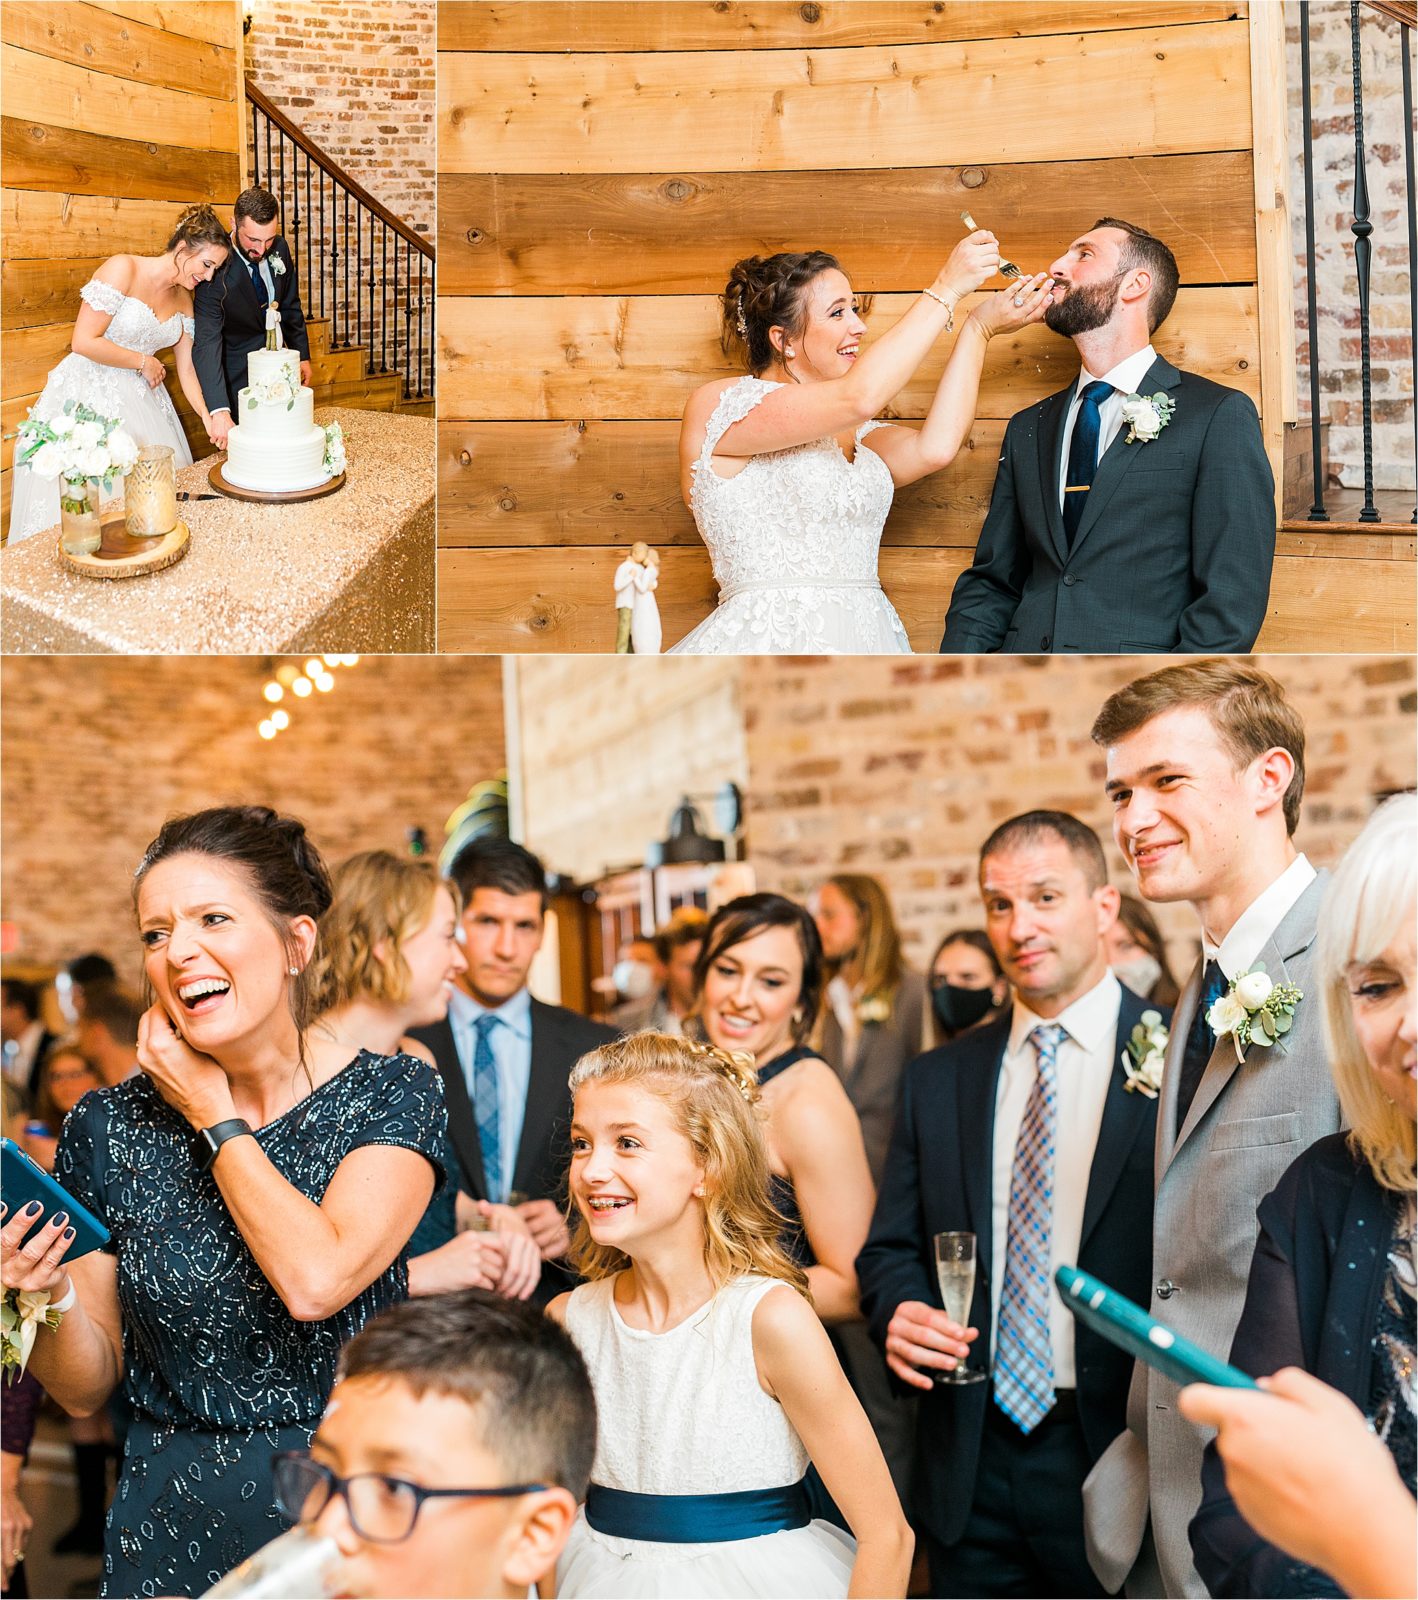 A bride feeds her groom cake as some misses his mouth and guests share a laugh at DFW Wedding Venue Rustic Grace Estate 